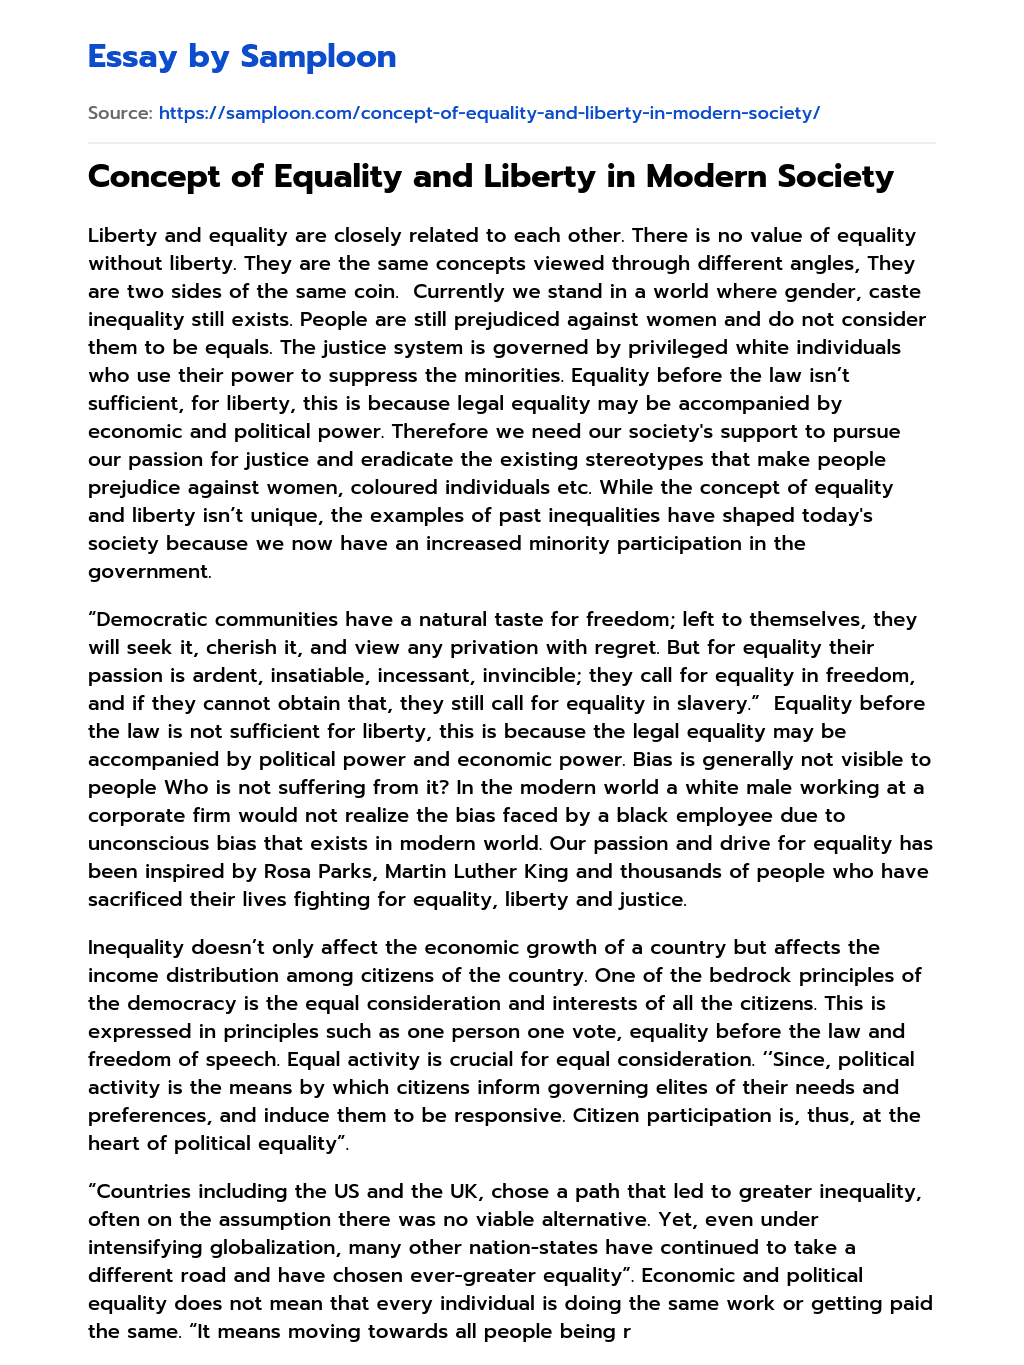 Concept of Equality and Liberty in Modern Society essay